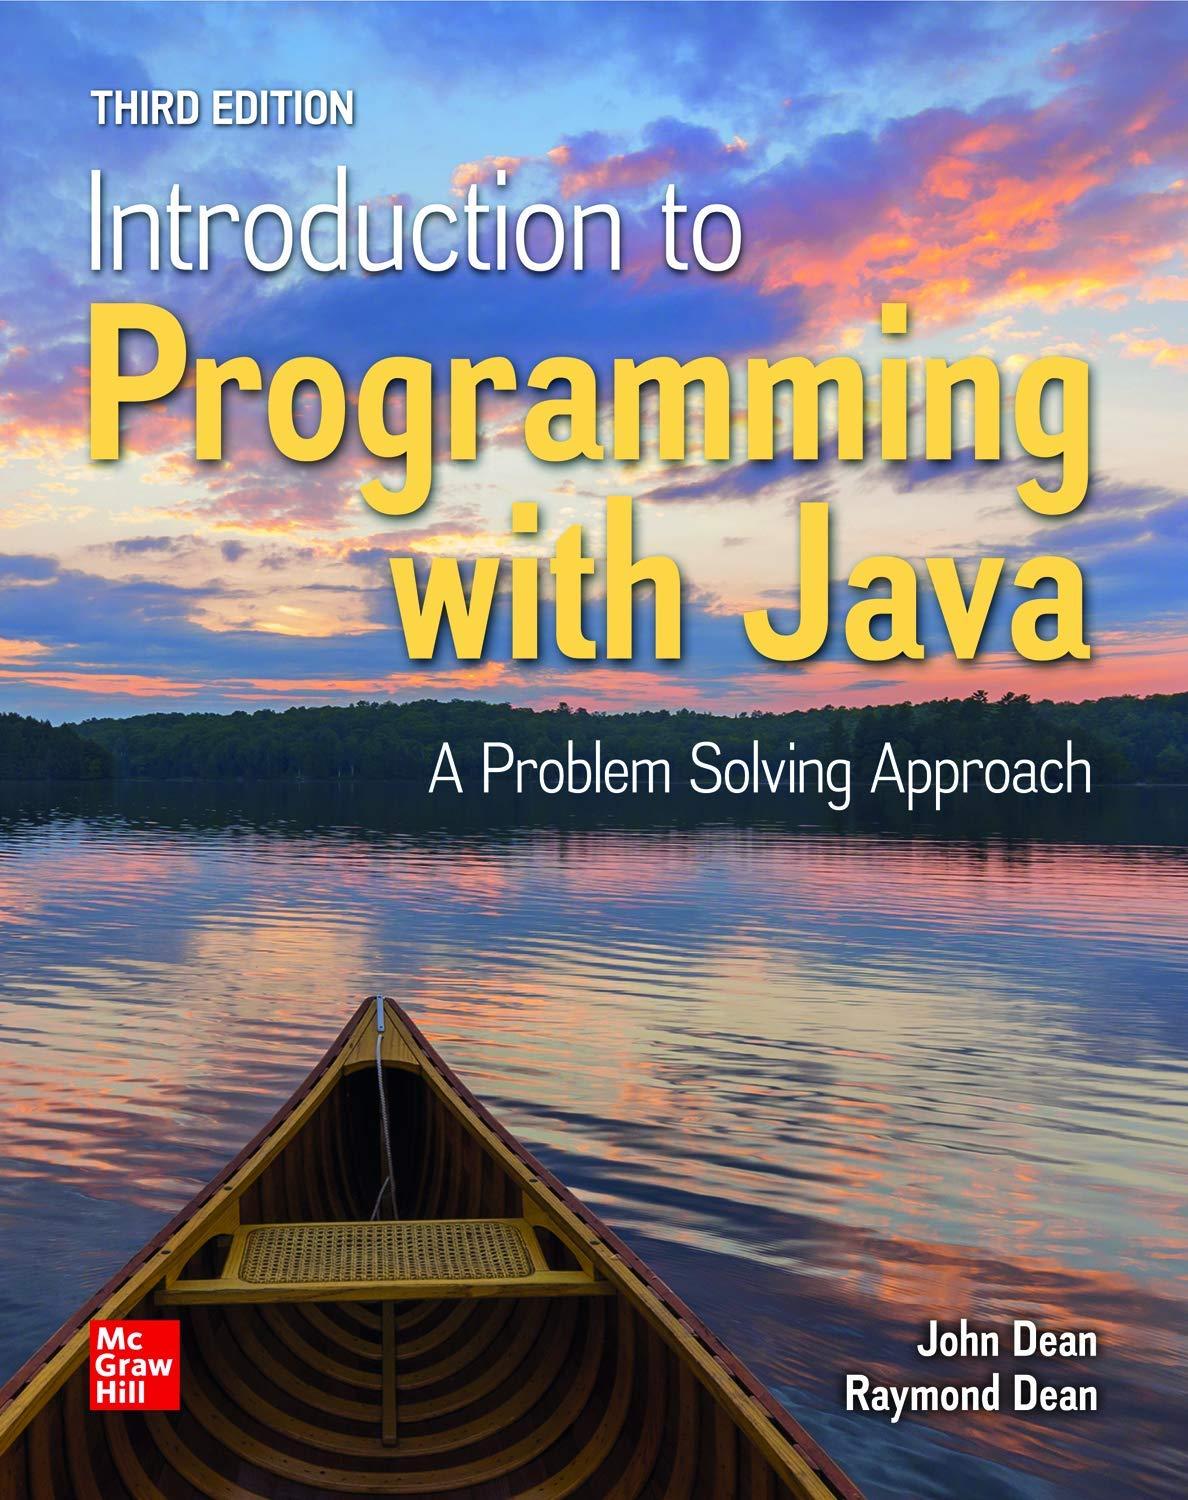 introduction to programming with java a problem solving approach 3rd edition john dean, ray dean 1260250202,